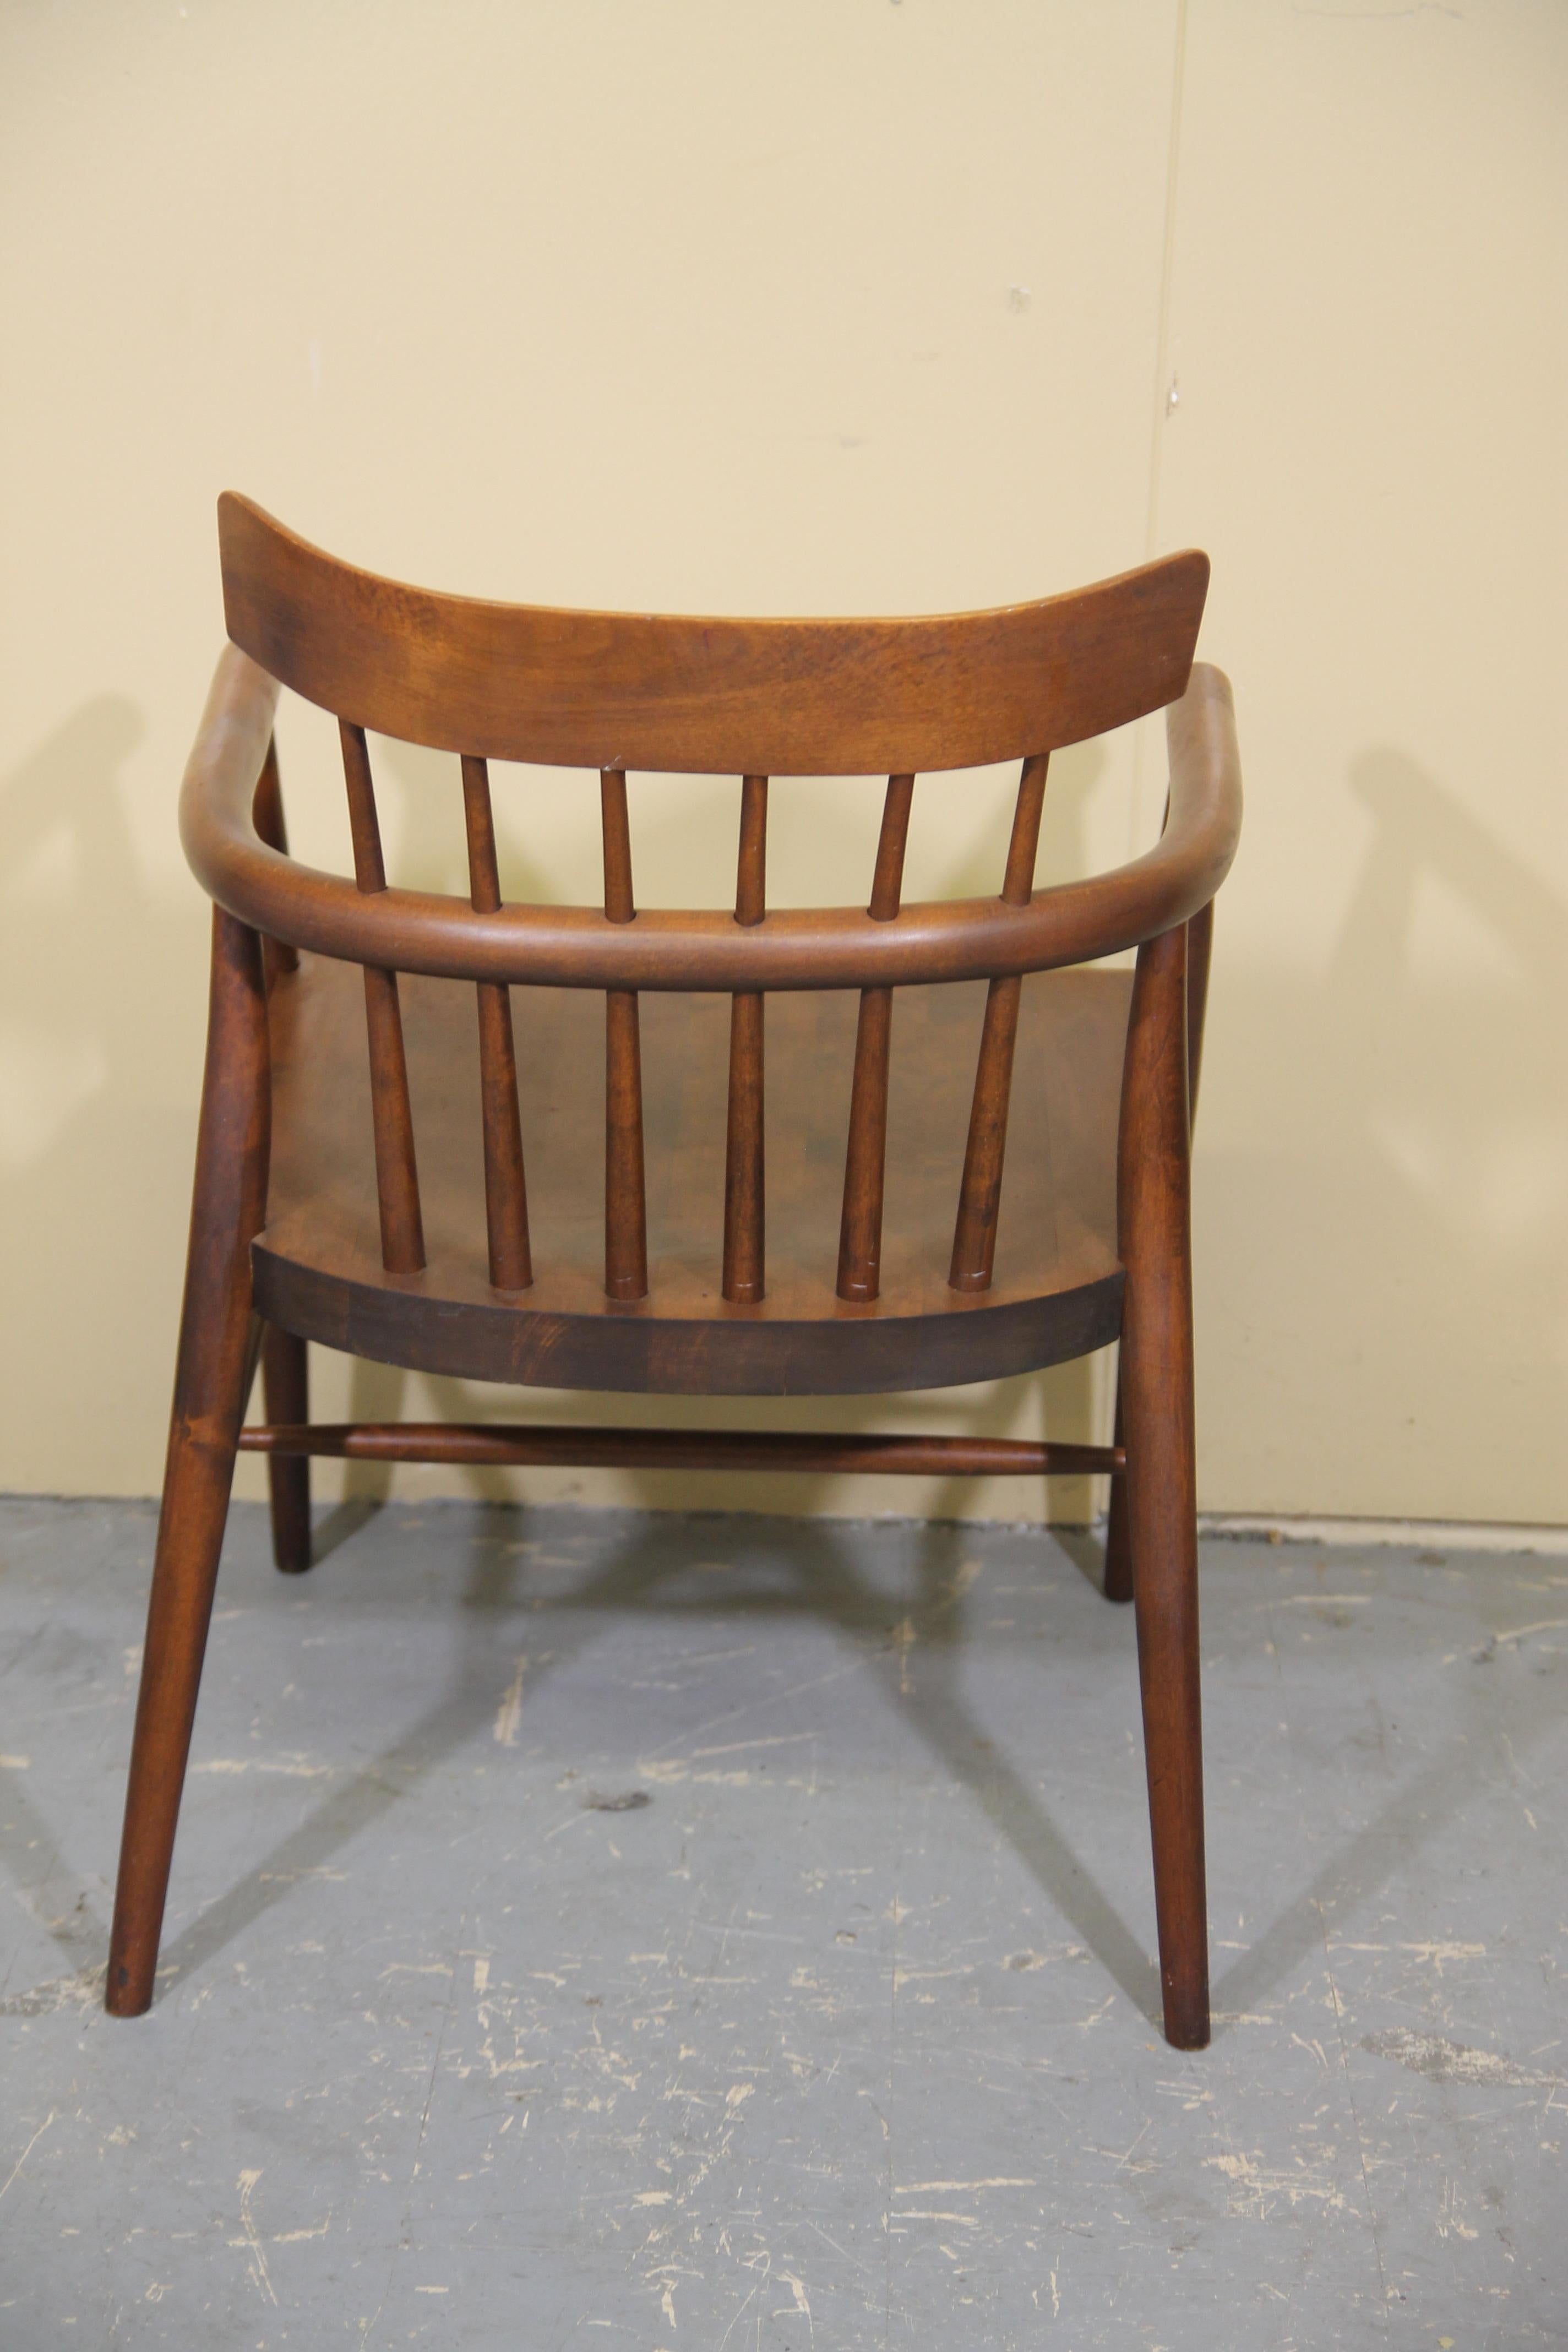 Paul McCobb Modernist Maple Armchair Designed in the 1950s In Good Condition For Sale In Asbury Park, NJ